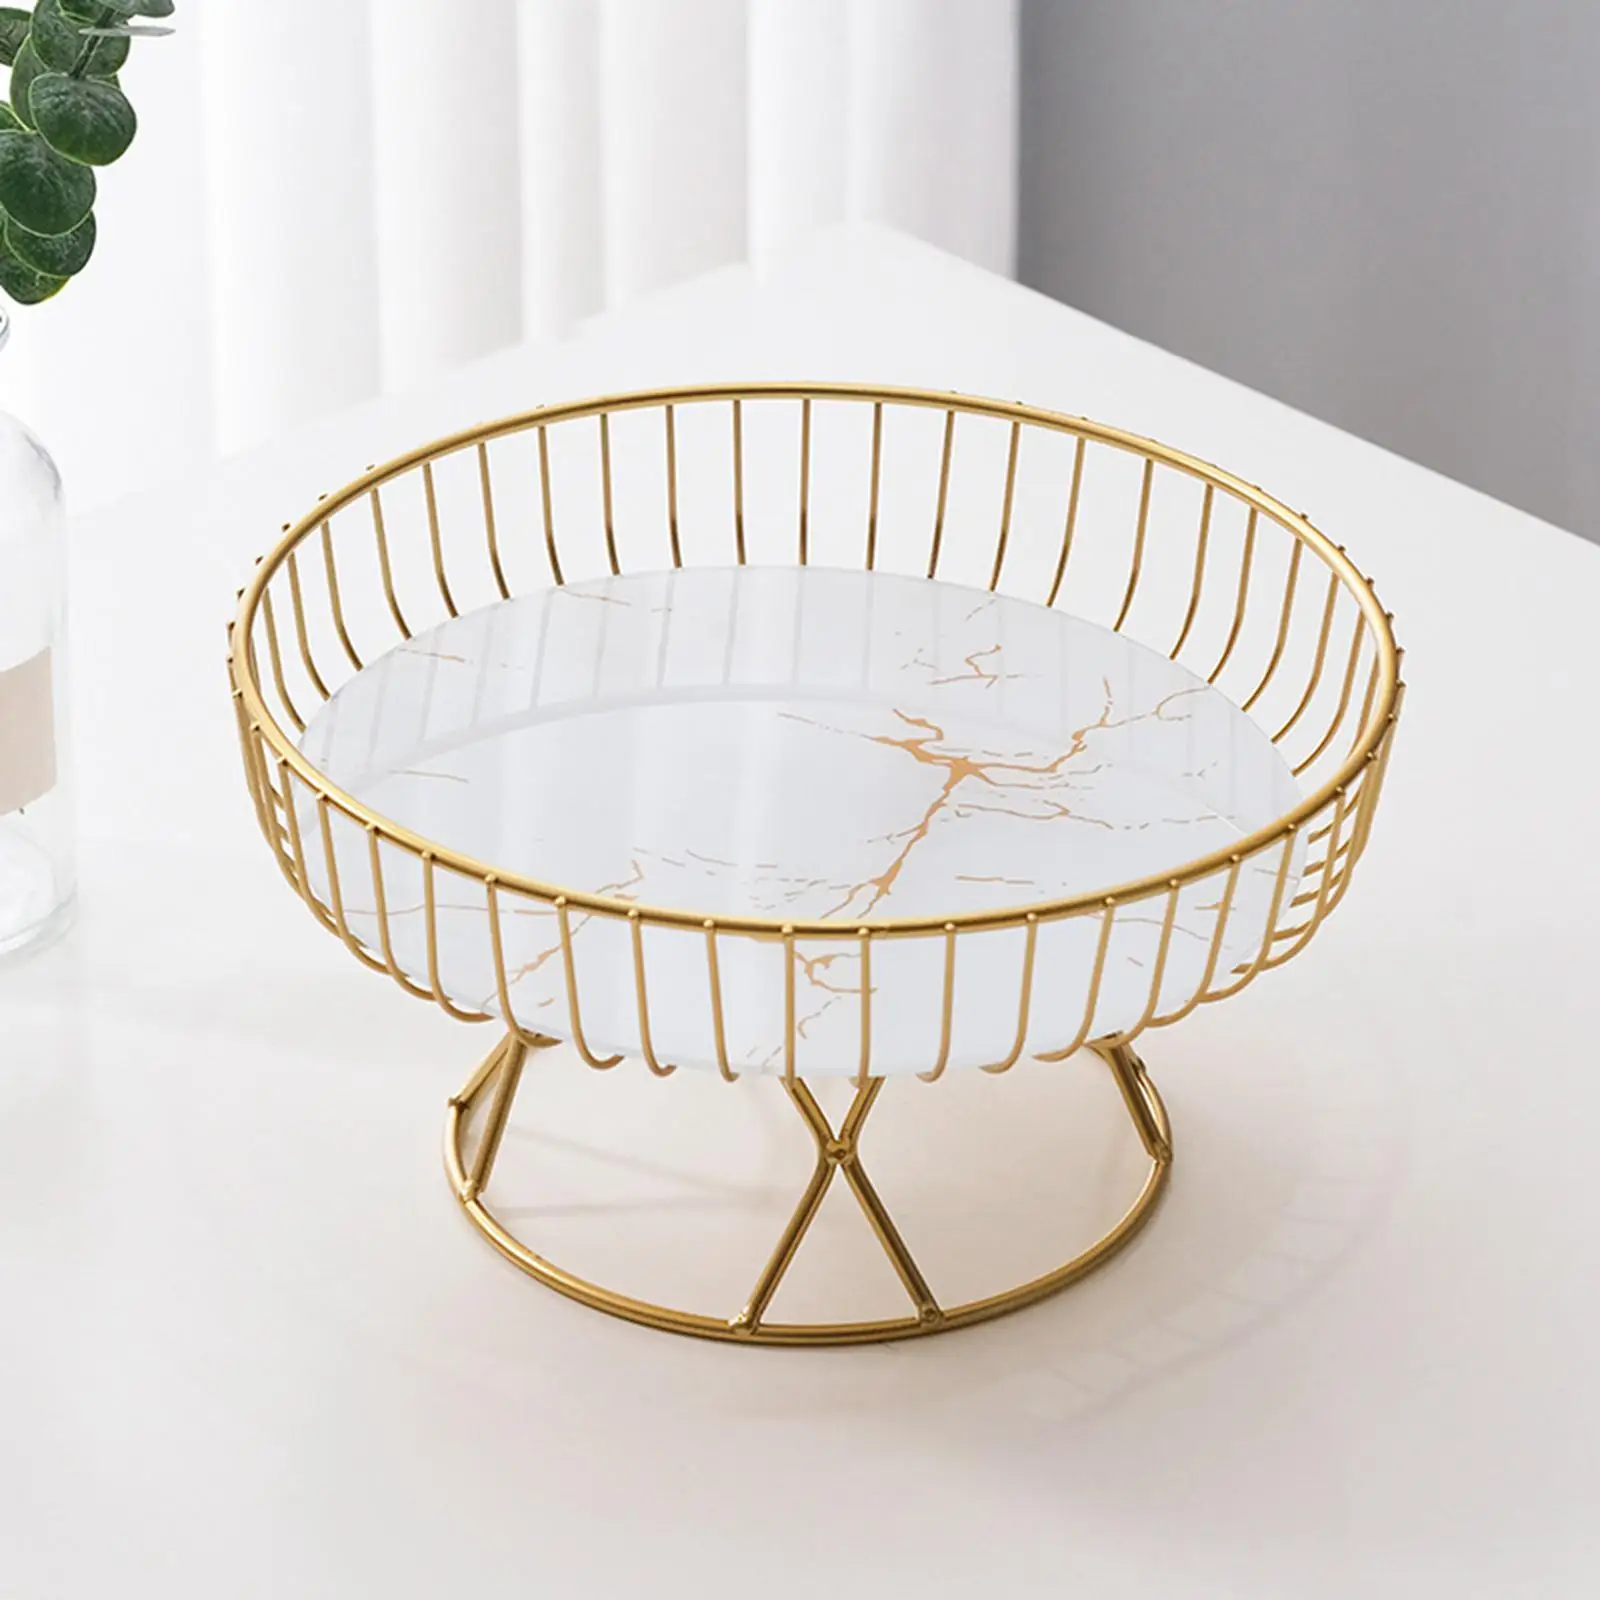 Golden Metal Iron Wire Fruit Stand Dish Serving Bowl, for Cabinet, Dining Table